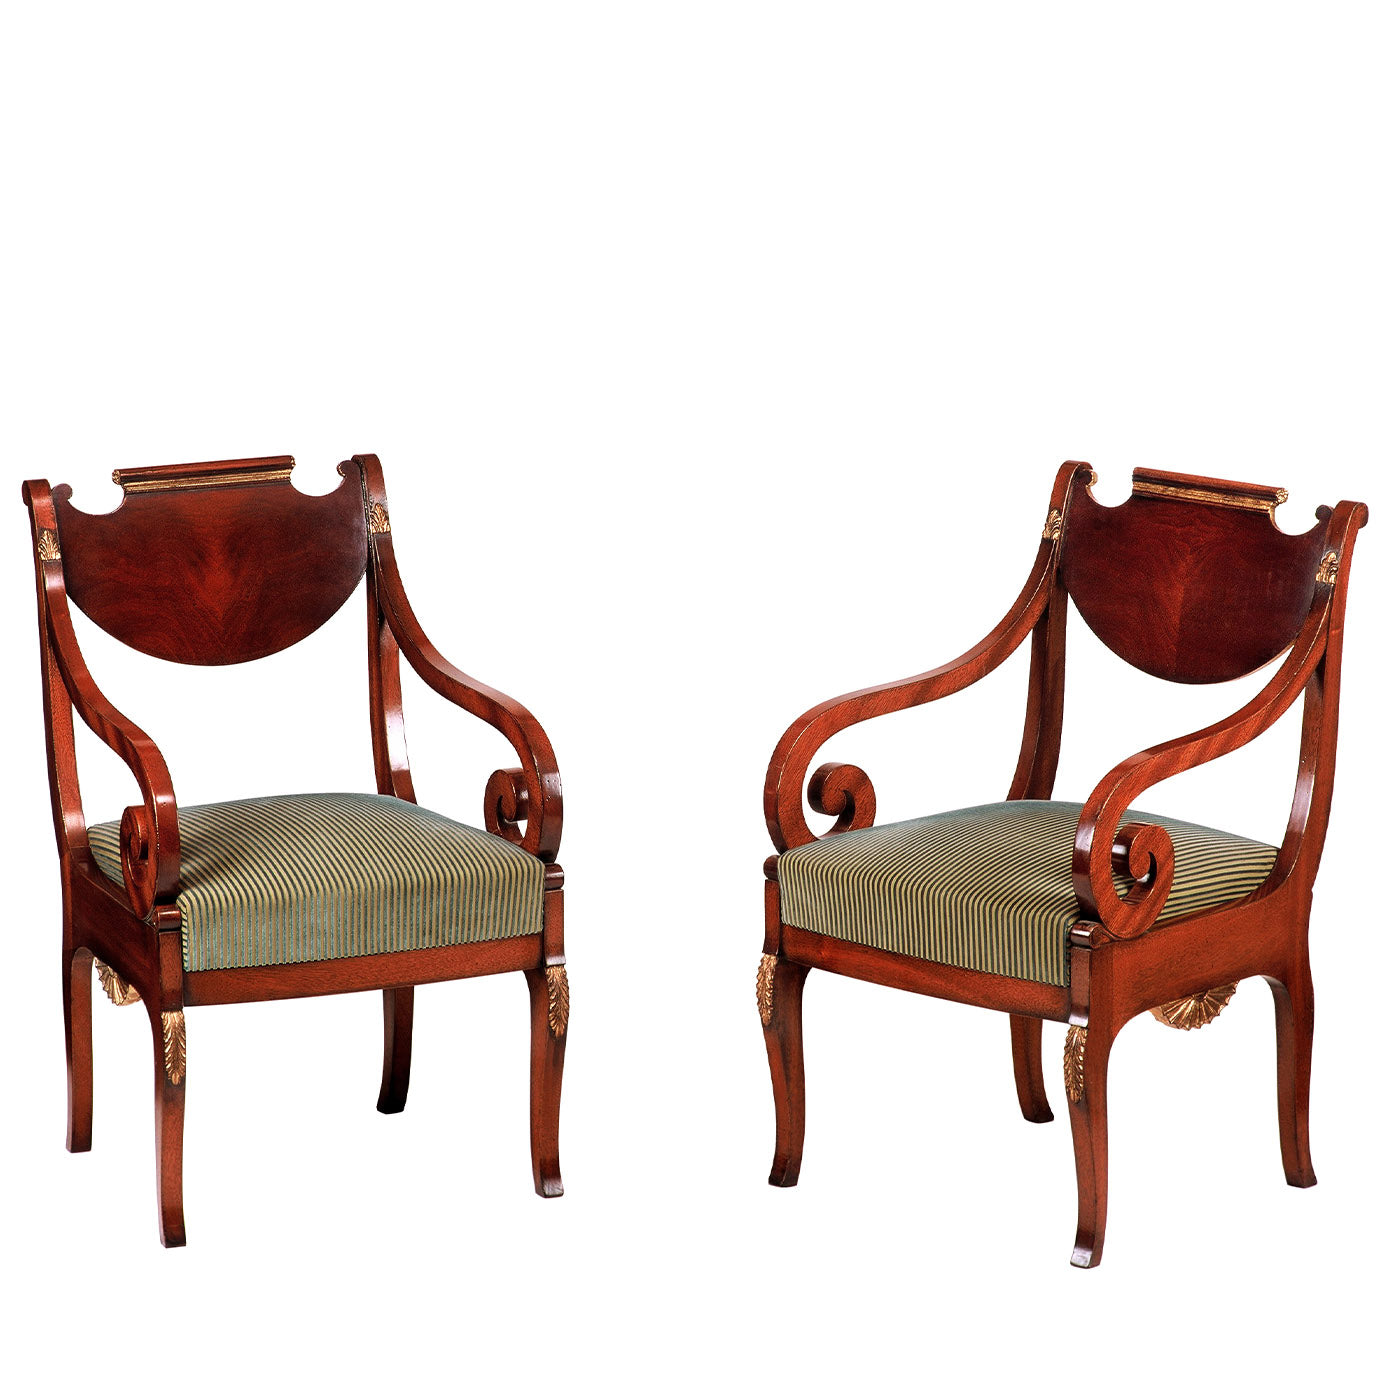 Russian Empire-Style Mahogany Chair With Arms - Alternative view 1